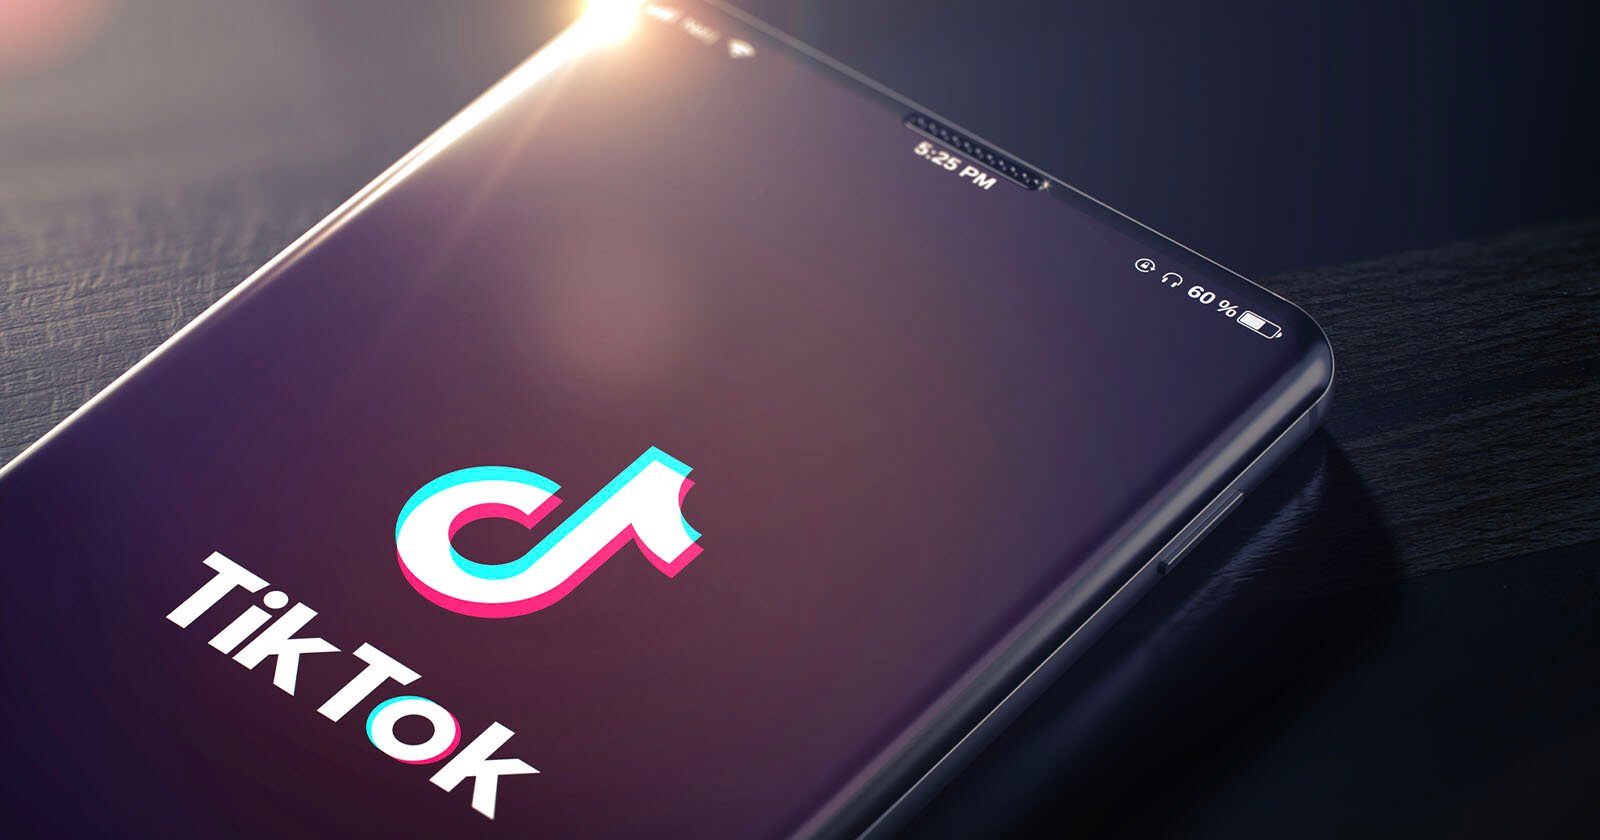  tiktok working photo app could rival 